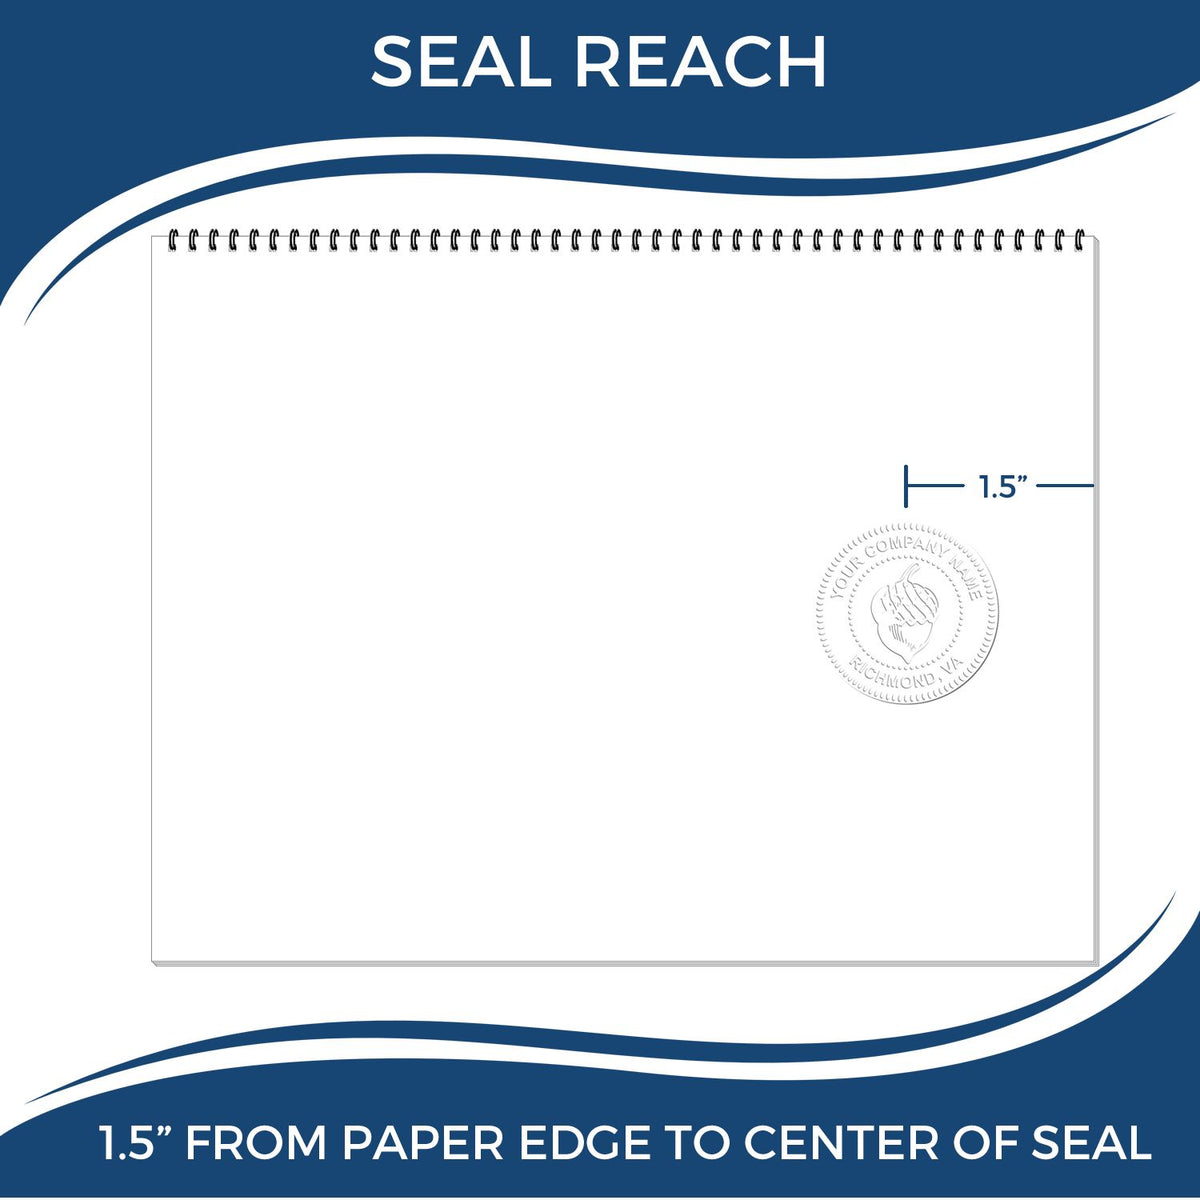 An infographic showing the seal reach which is represented by a ruler and a miniature seal image of the Gift Nebraska Land Surveyor Seal